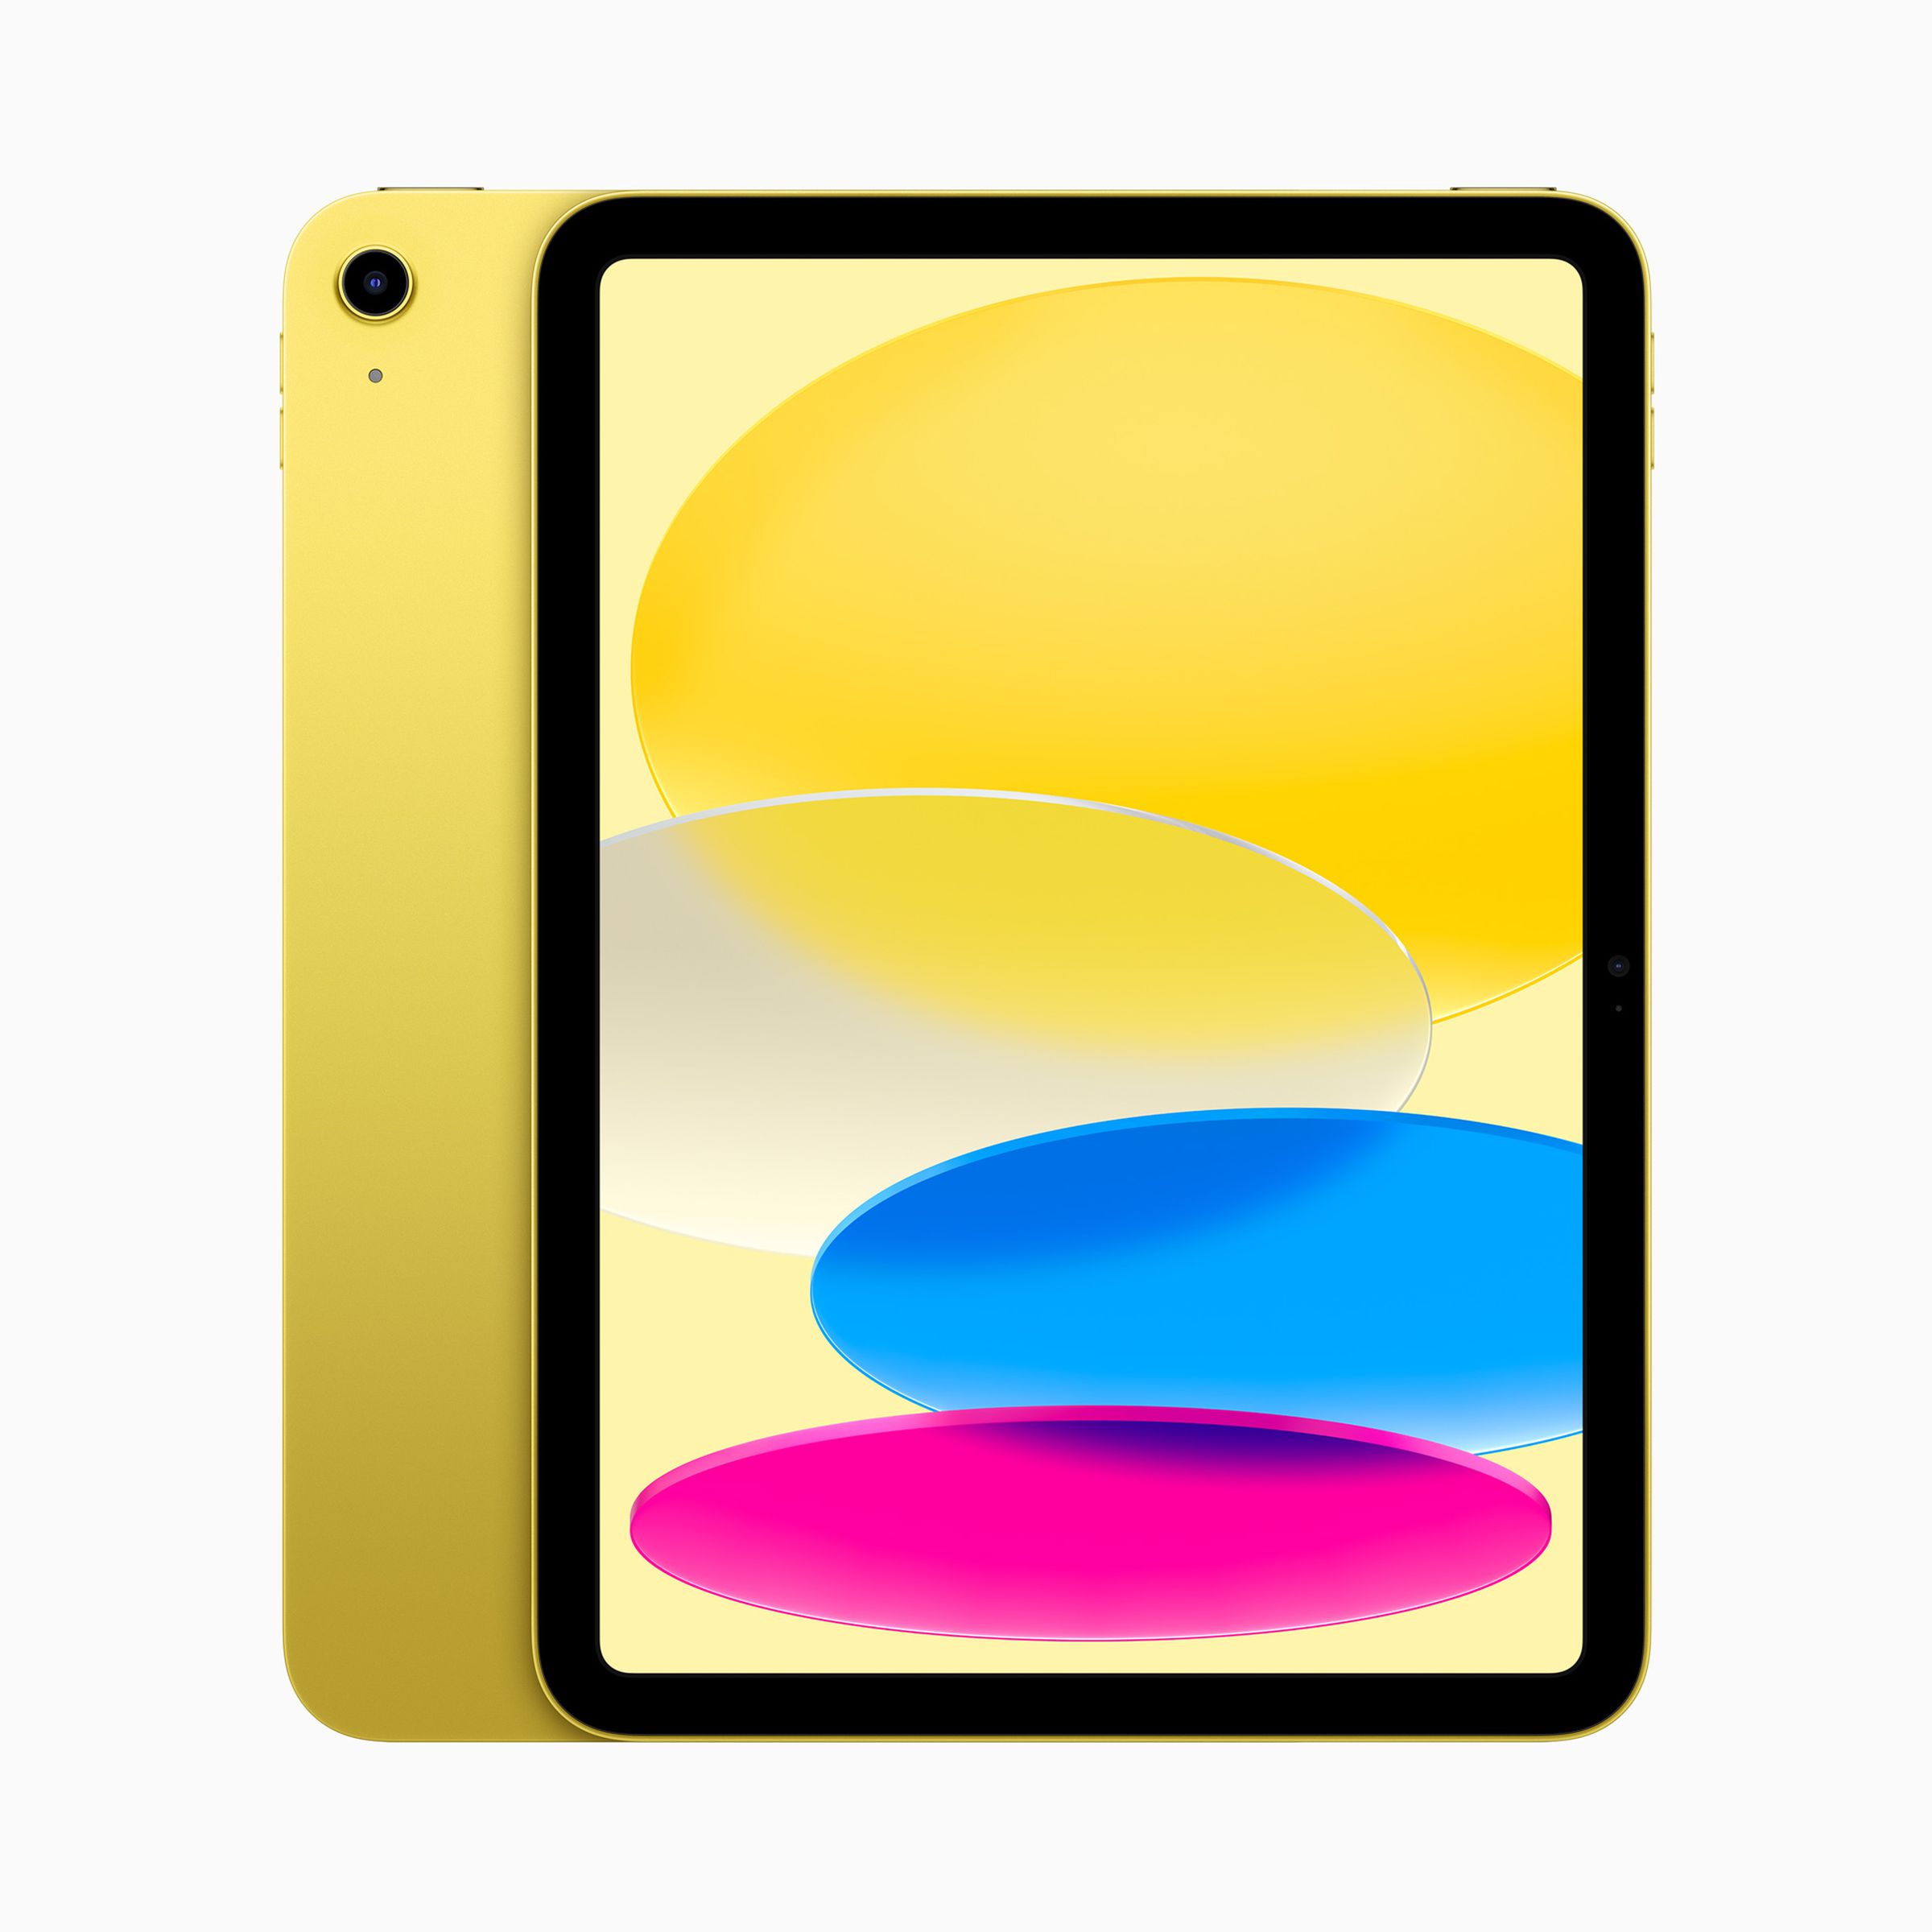 The yellow iPad color.